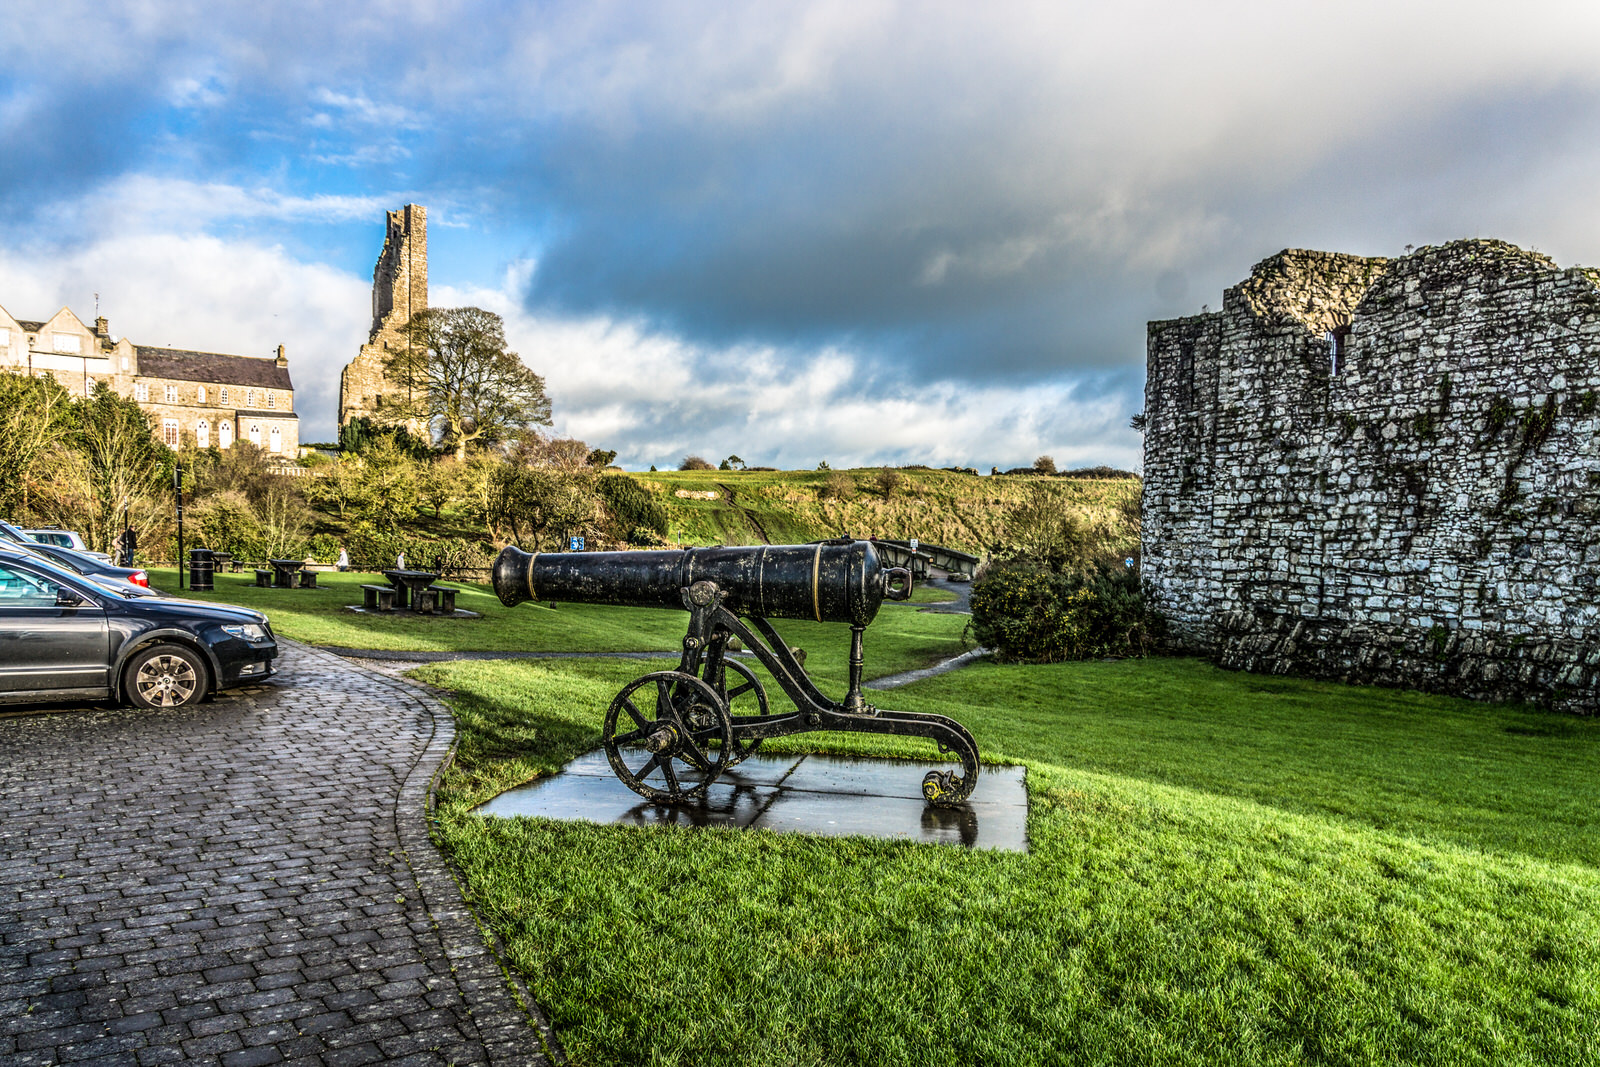  TRIM CASTLE PHOTOGRAPHED ON CHRISTMAS MORNING 2014 